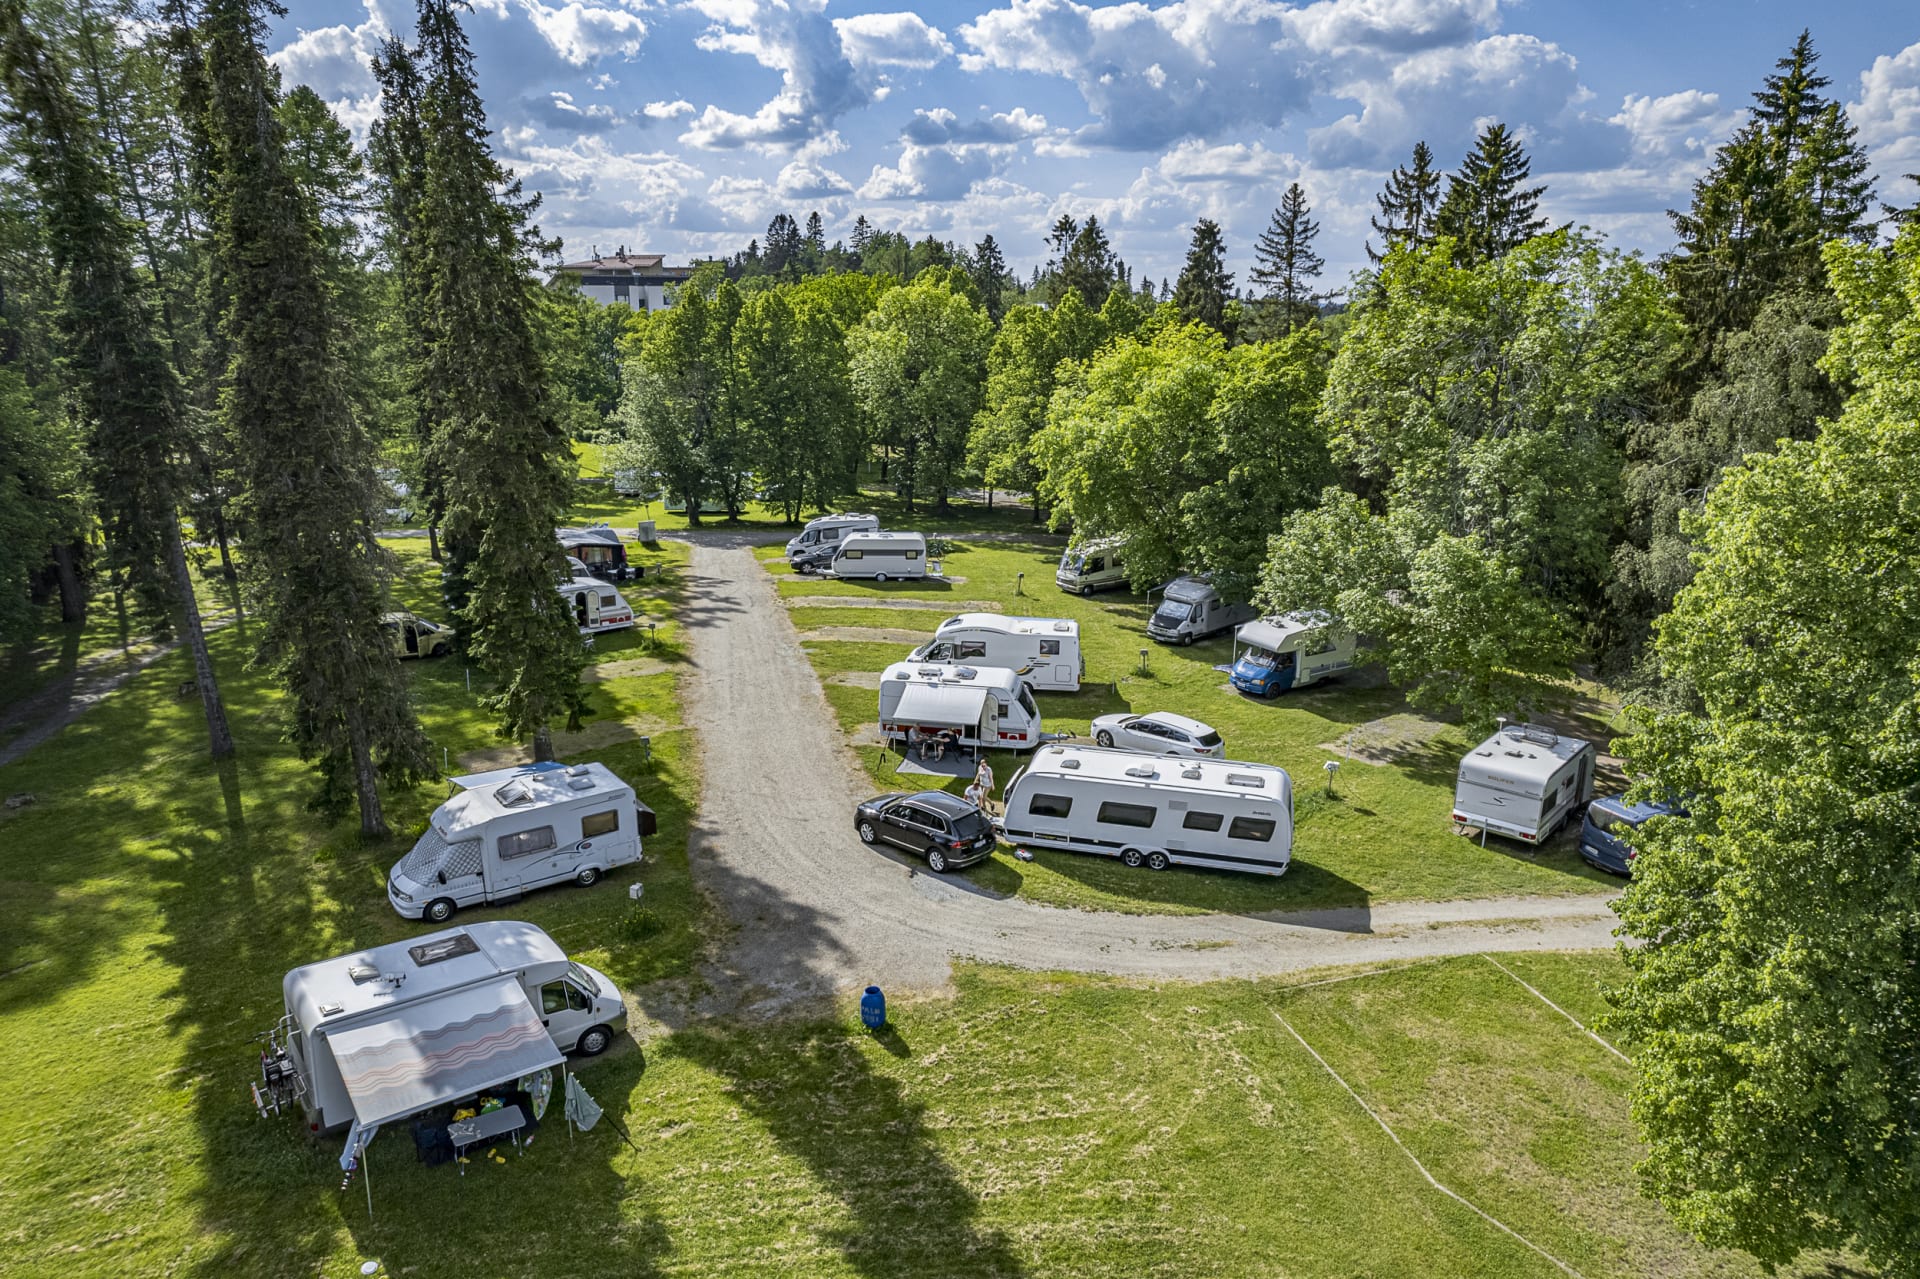 Härmälä Camping has 90 pitches with electricity for caravanners.